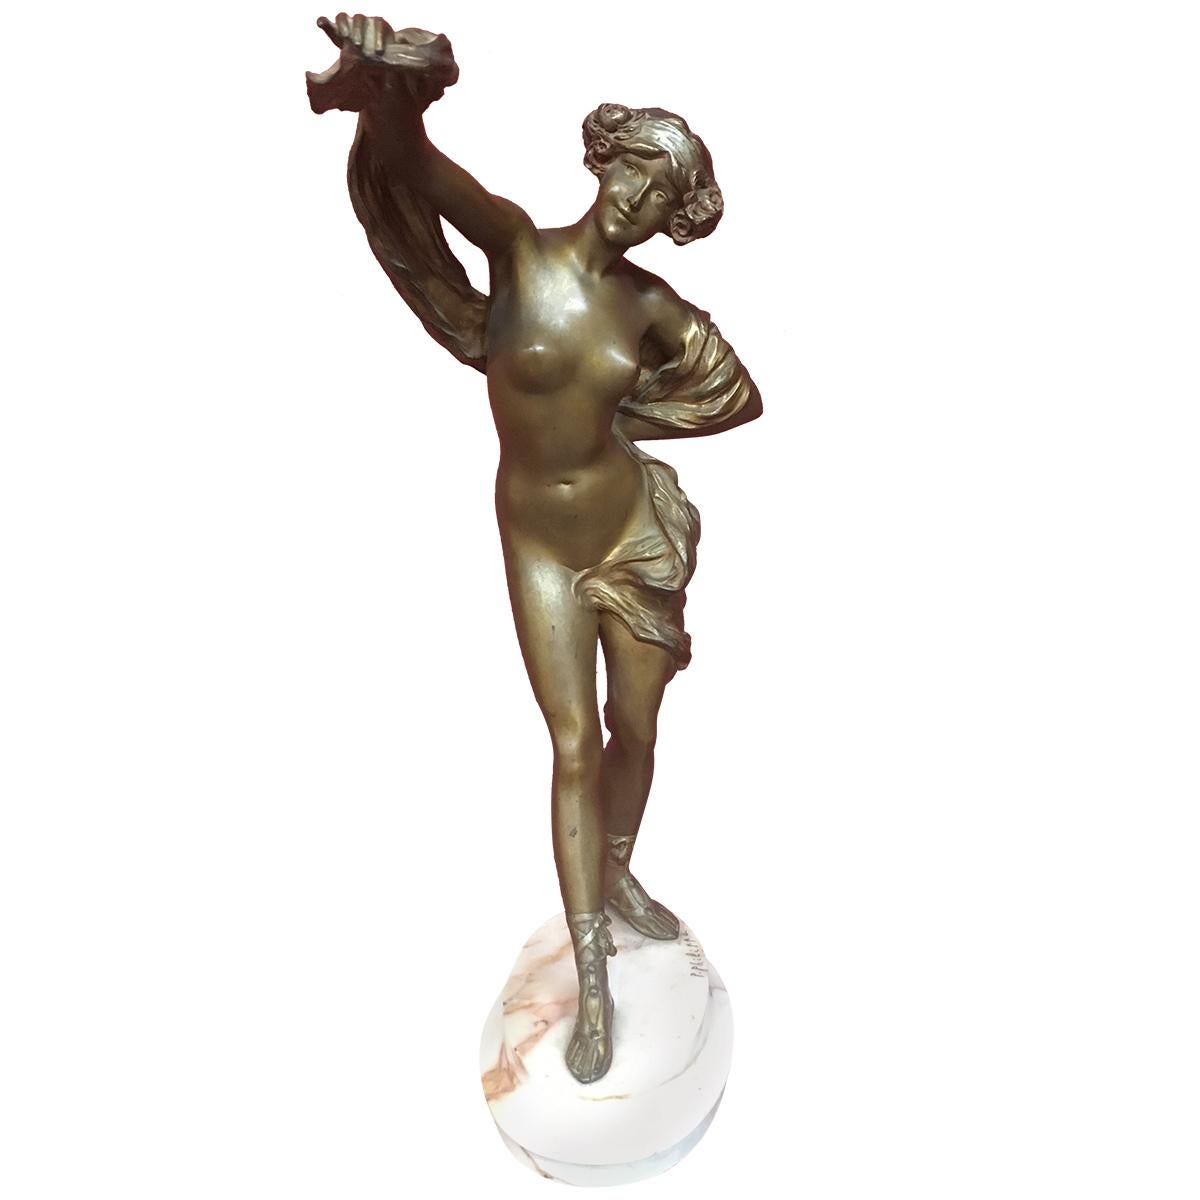 Paul Philippe ( 1870-1930) Art Nouveau Sculpture in Bronze, Signed on Marble